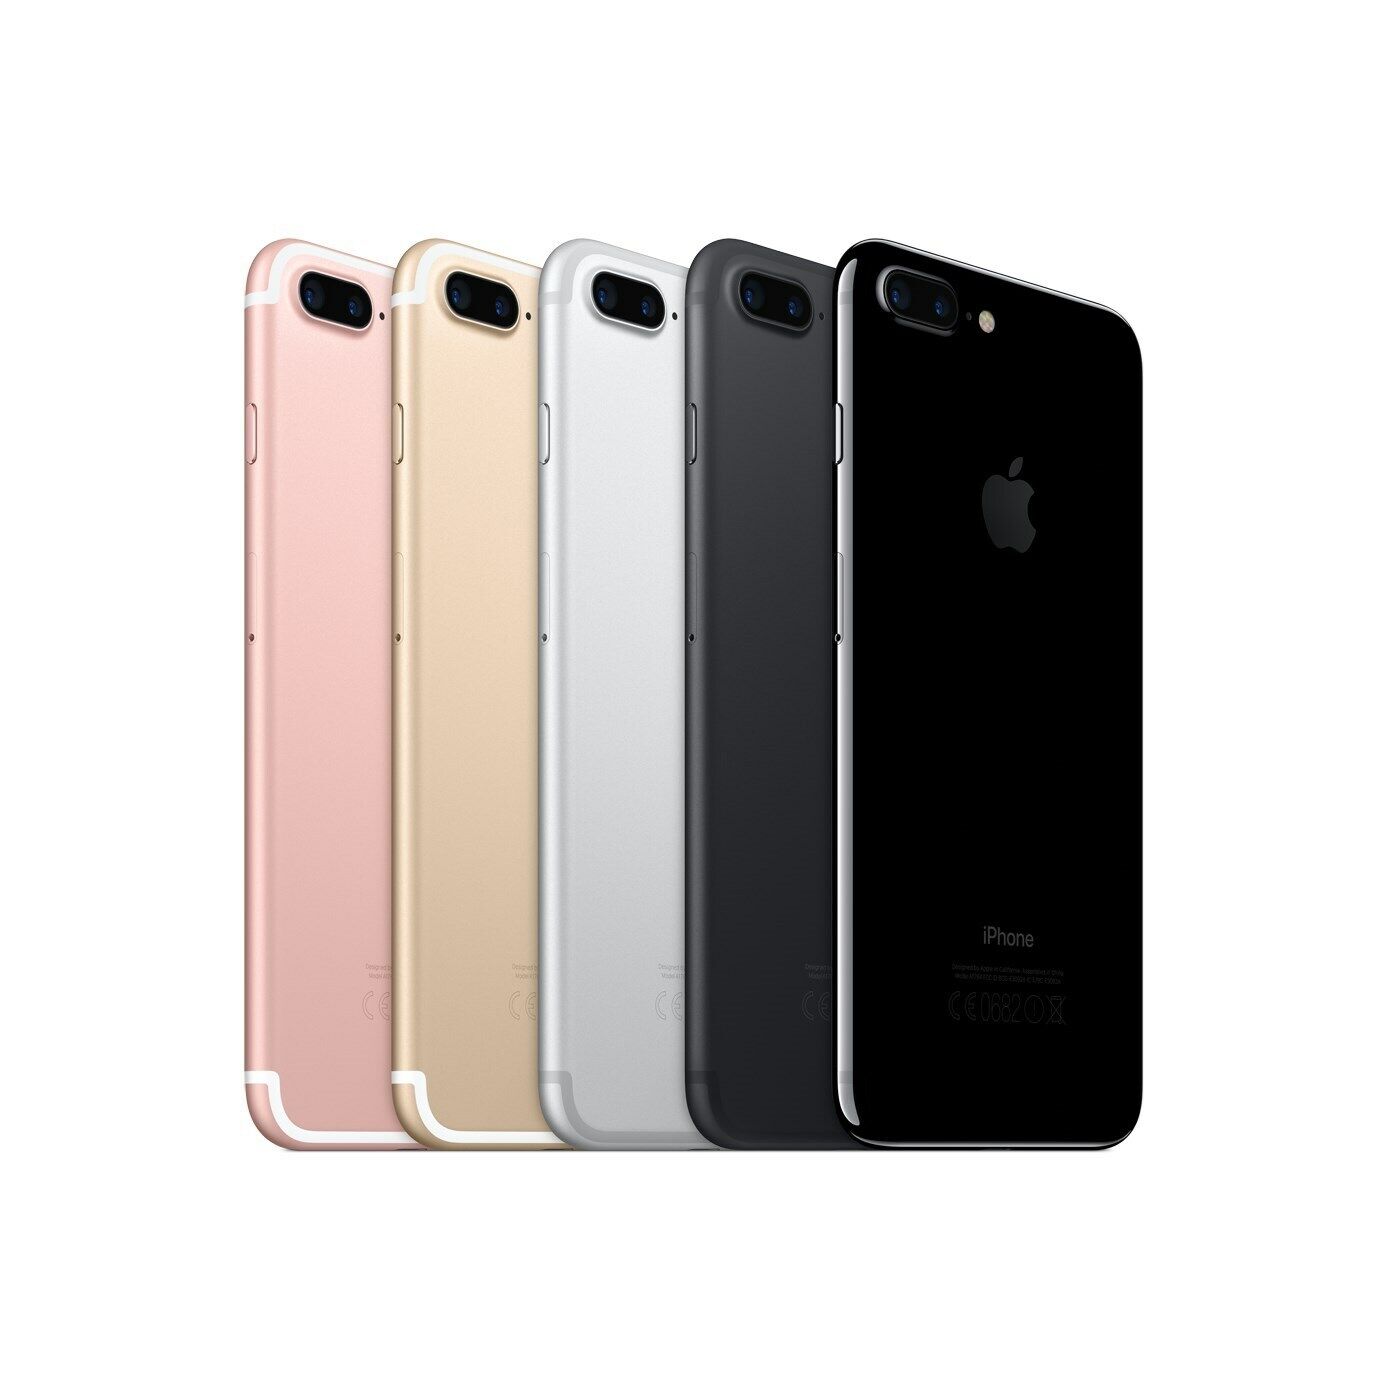 Apple iPhone 7 Plus 32GB - 128GB T-Mobile Network Only - Black Gold Rose  Gold